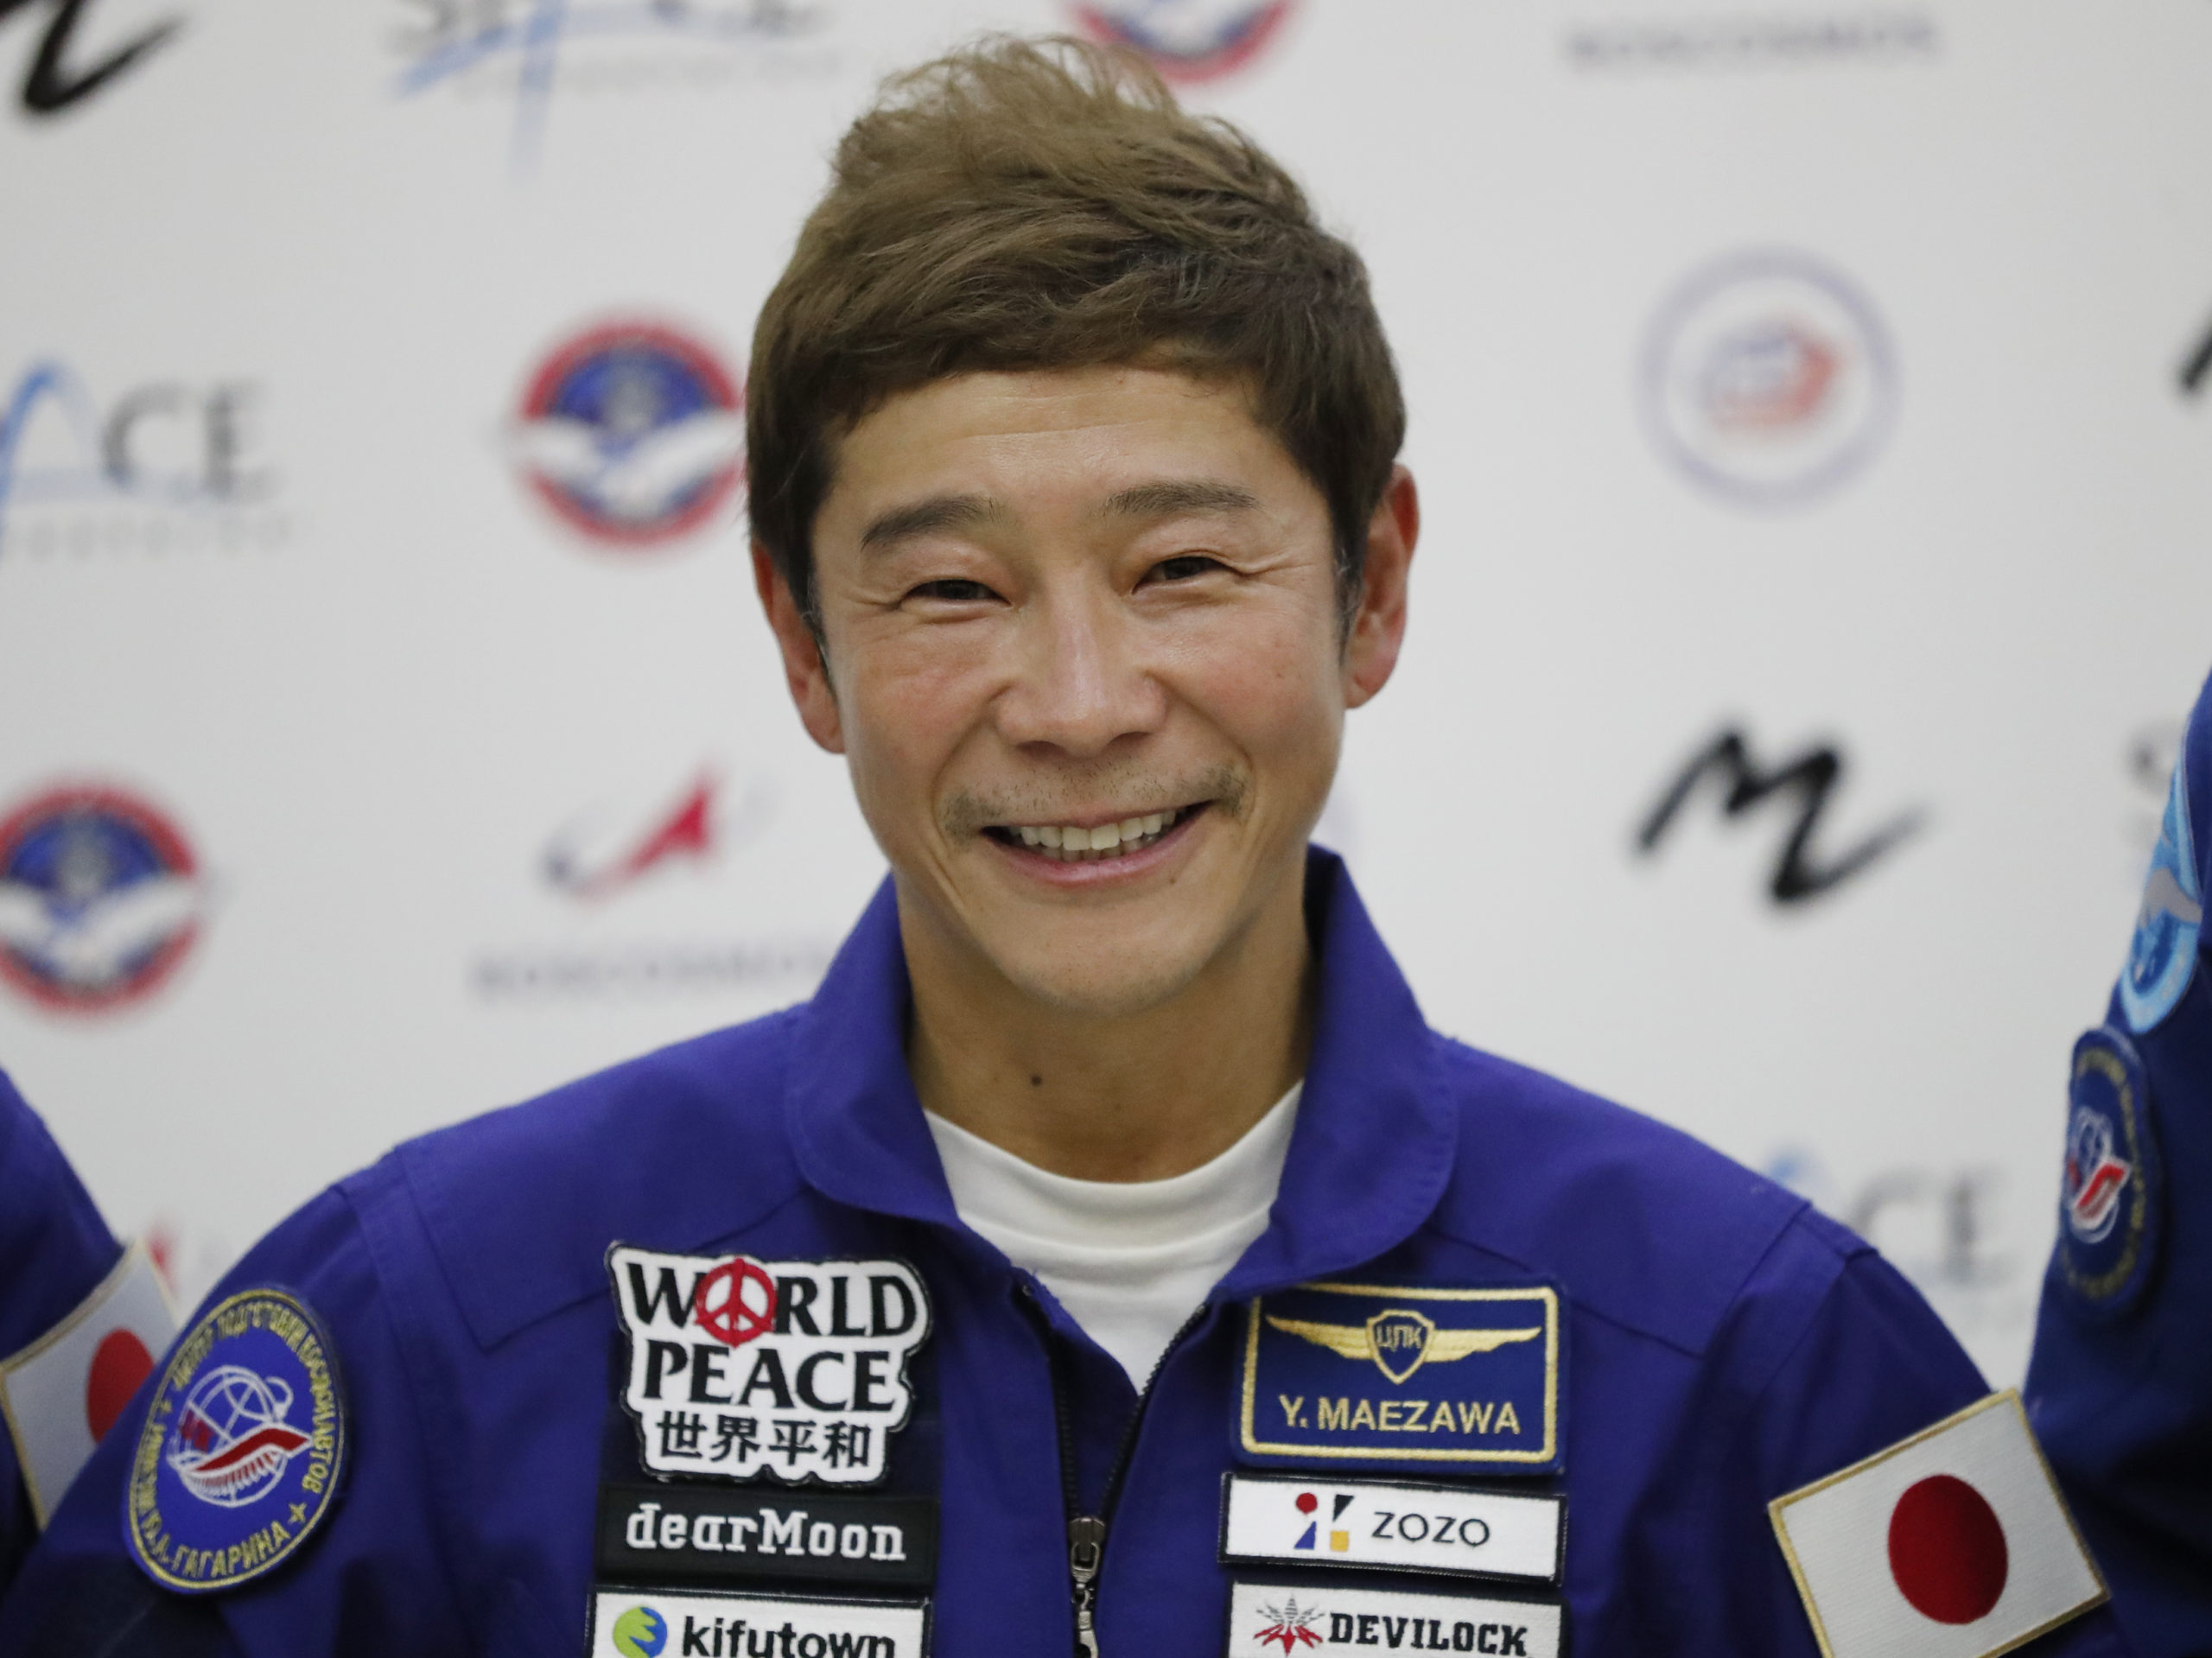 Japanese billionaire Yusaku Maezawa is seen at a 2021 news conference ahead of the expedition to the International Space Station. Maezawa said on June 1 that he has canceled his planned flight around the moon on a Space X spaceship because of uncertainty about when it may be possible.